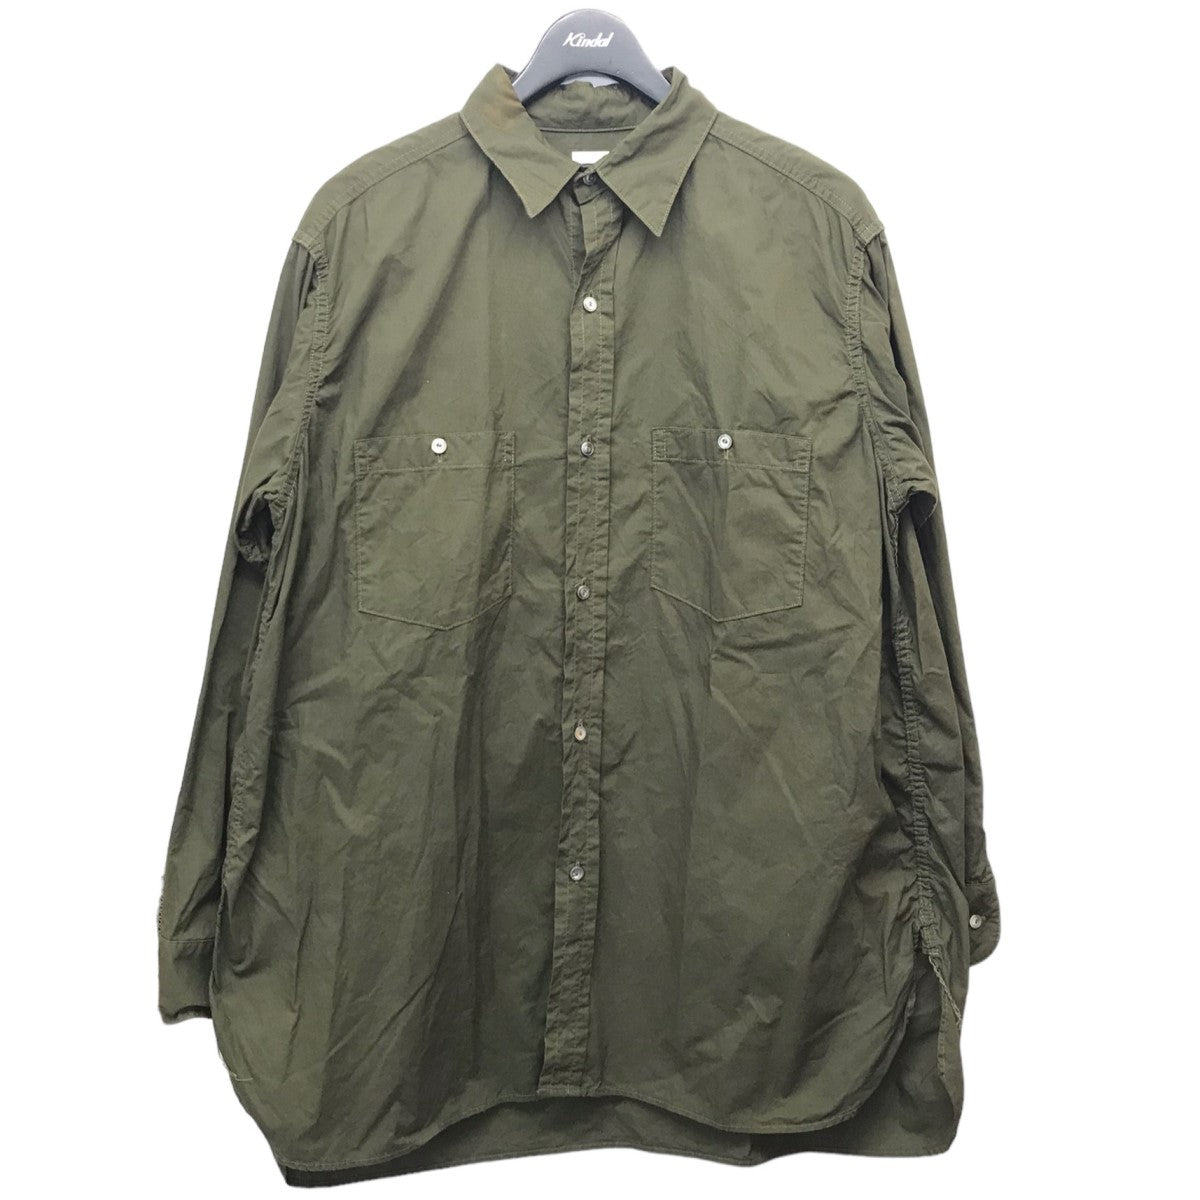 A．PRESSE(アプレッセ) 22AW「Over Dyeing Military Shirt」オーバー ...